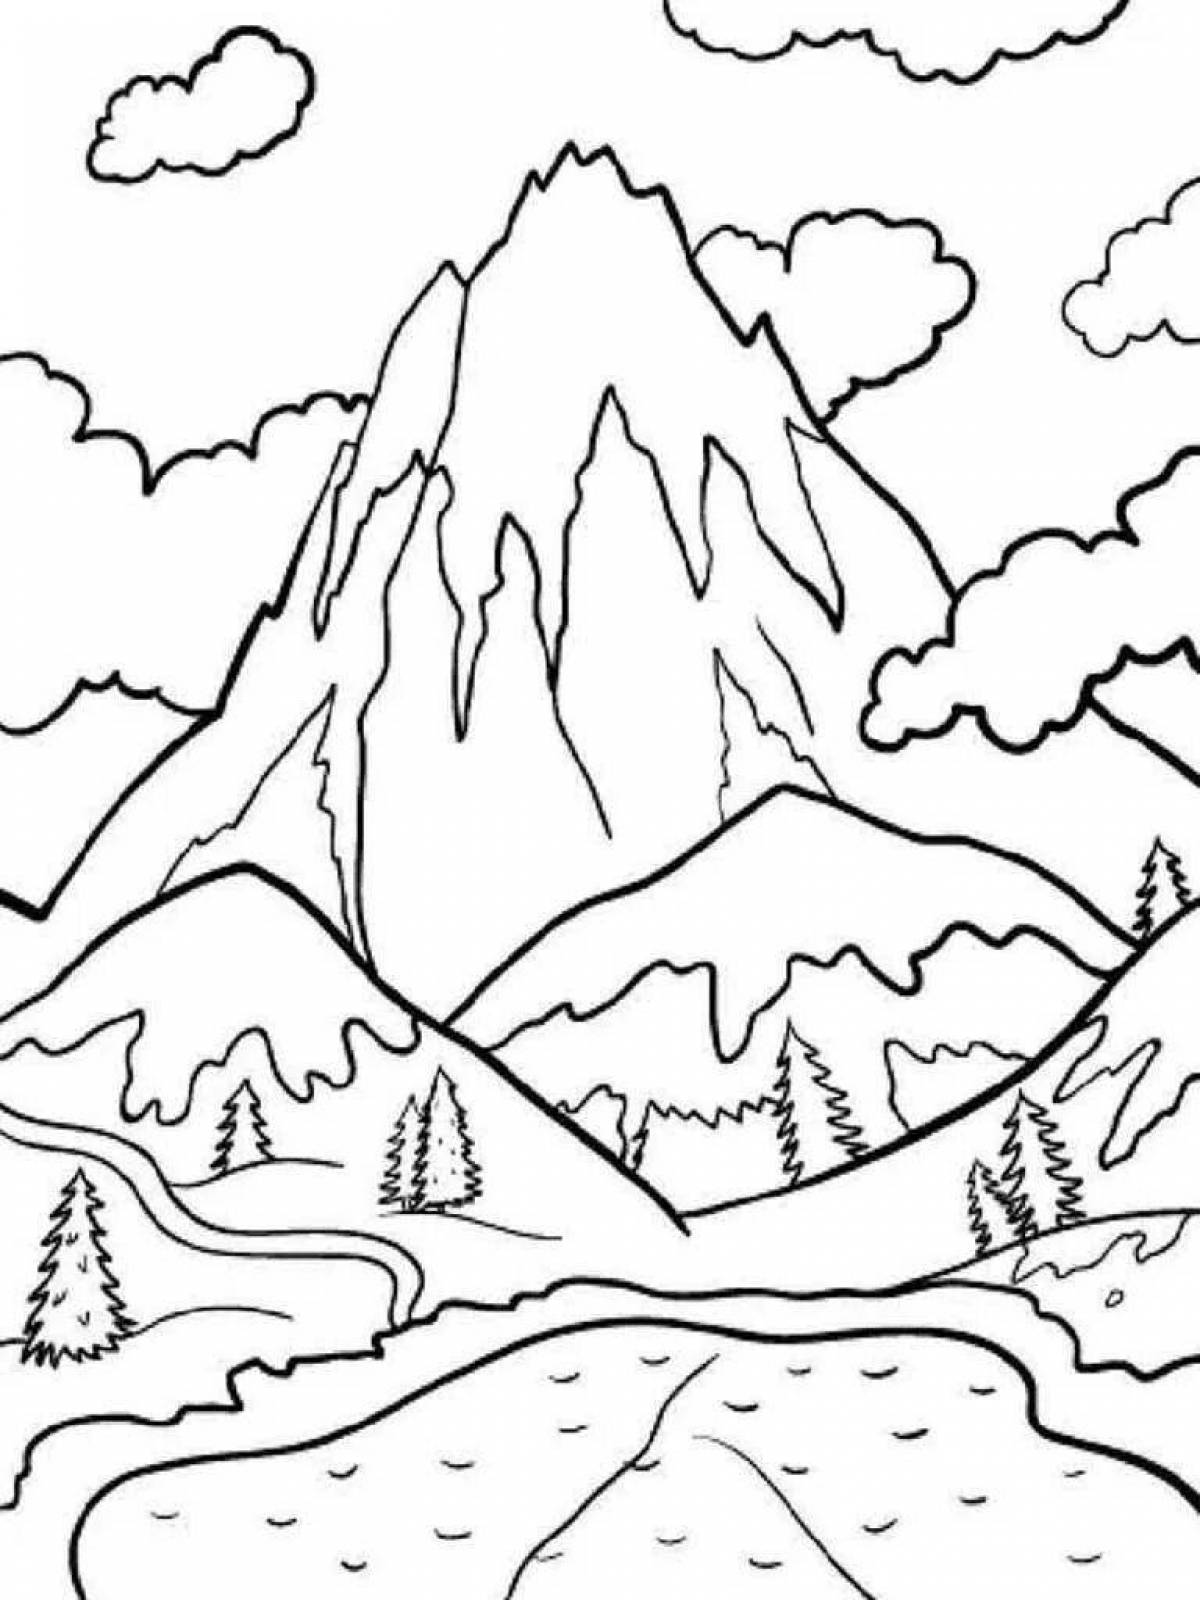 Mountains for kids #4